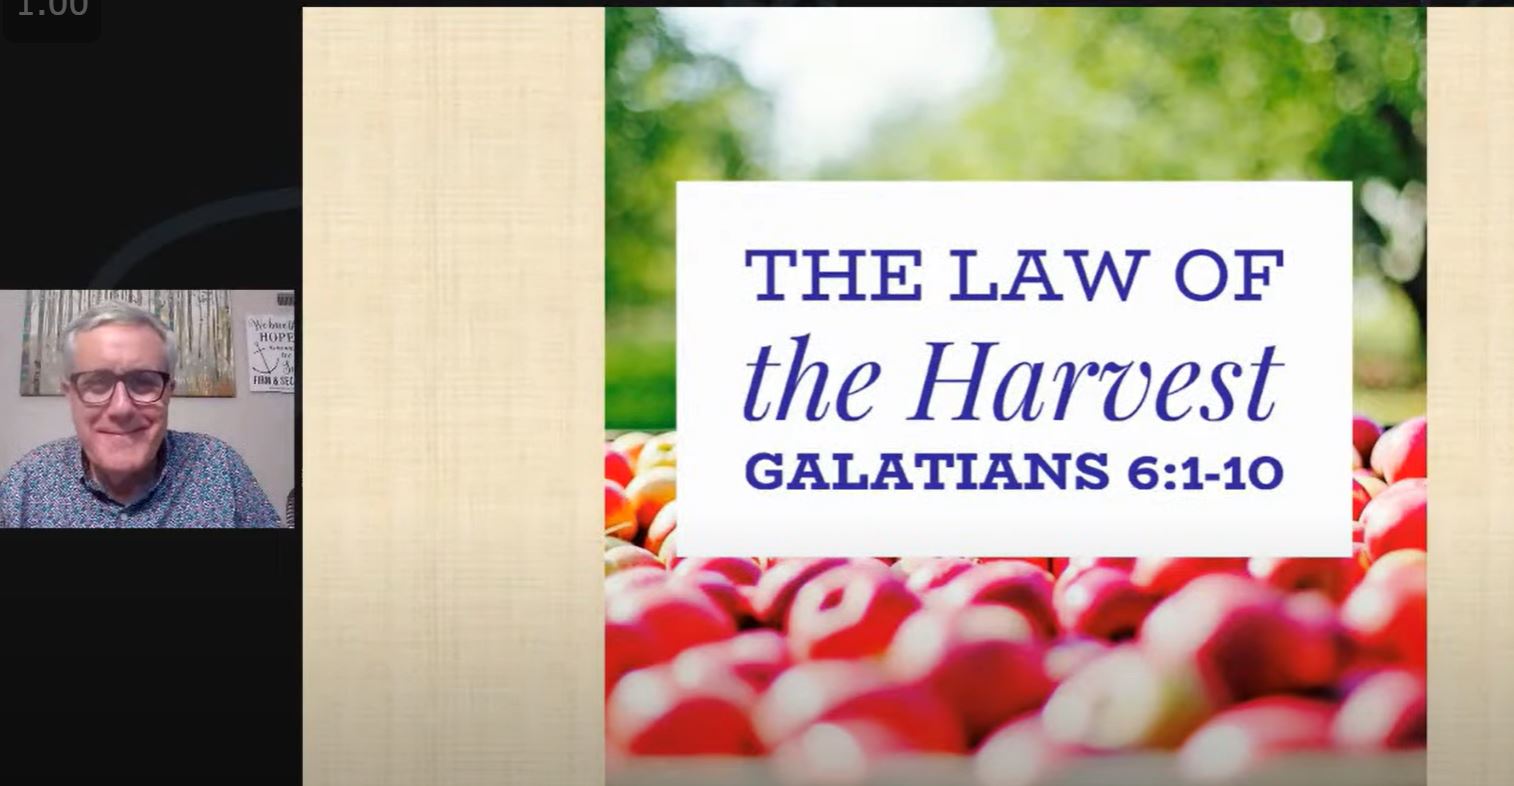 The Law of the Harvest (Galatians 6:1-10)